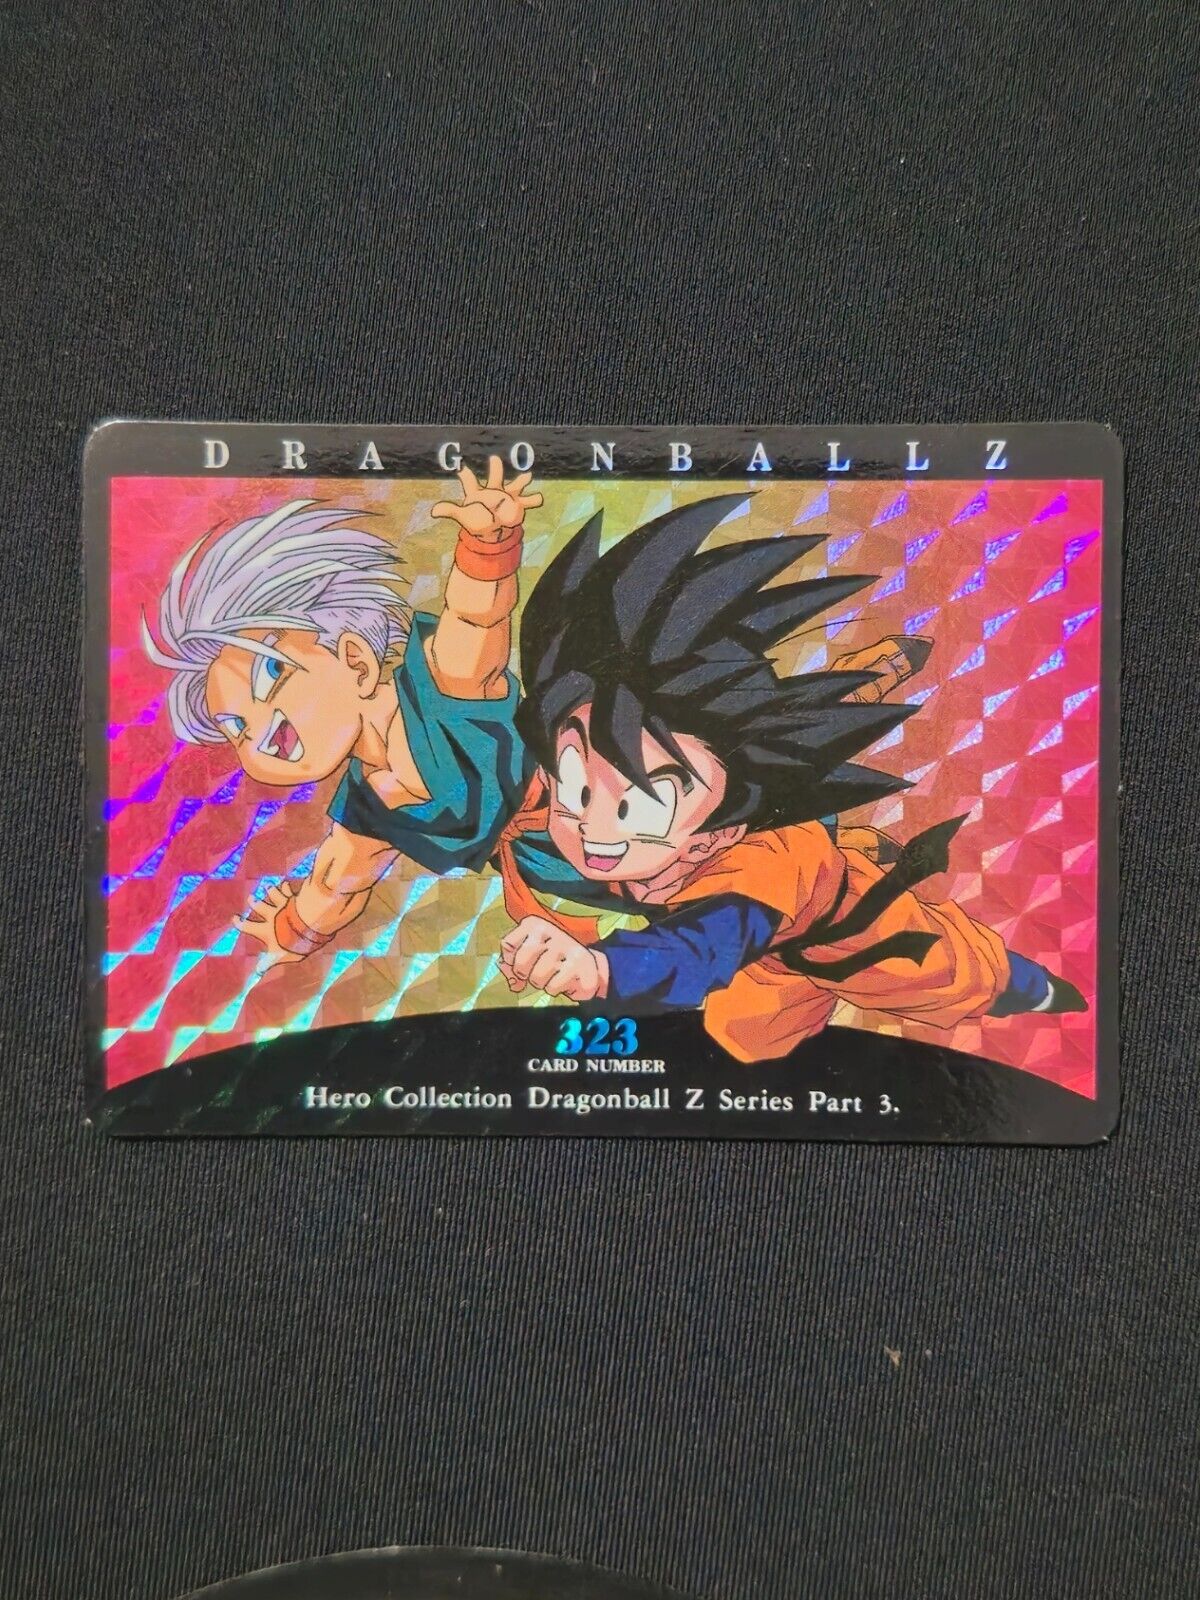 Dragon Ball Z Hero Collection Series 3 Prism Card #323 Goten and Trunks 1995